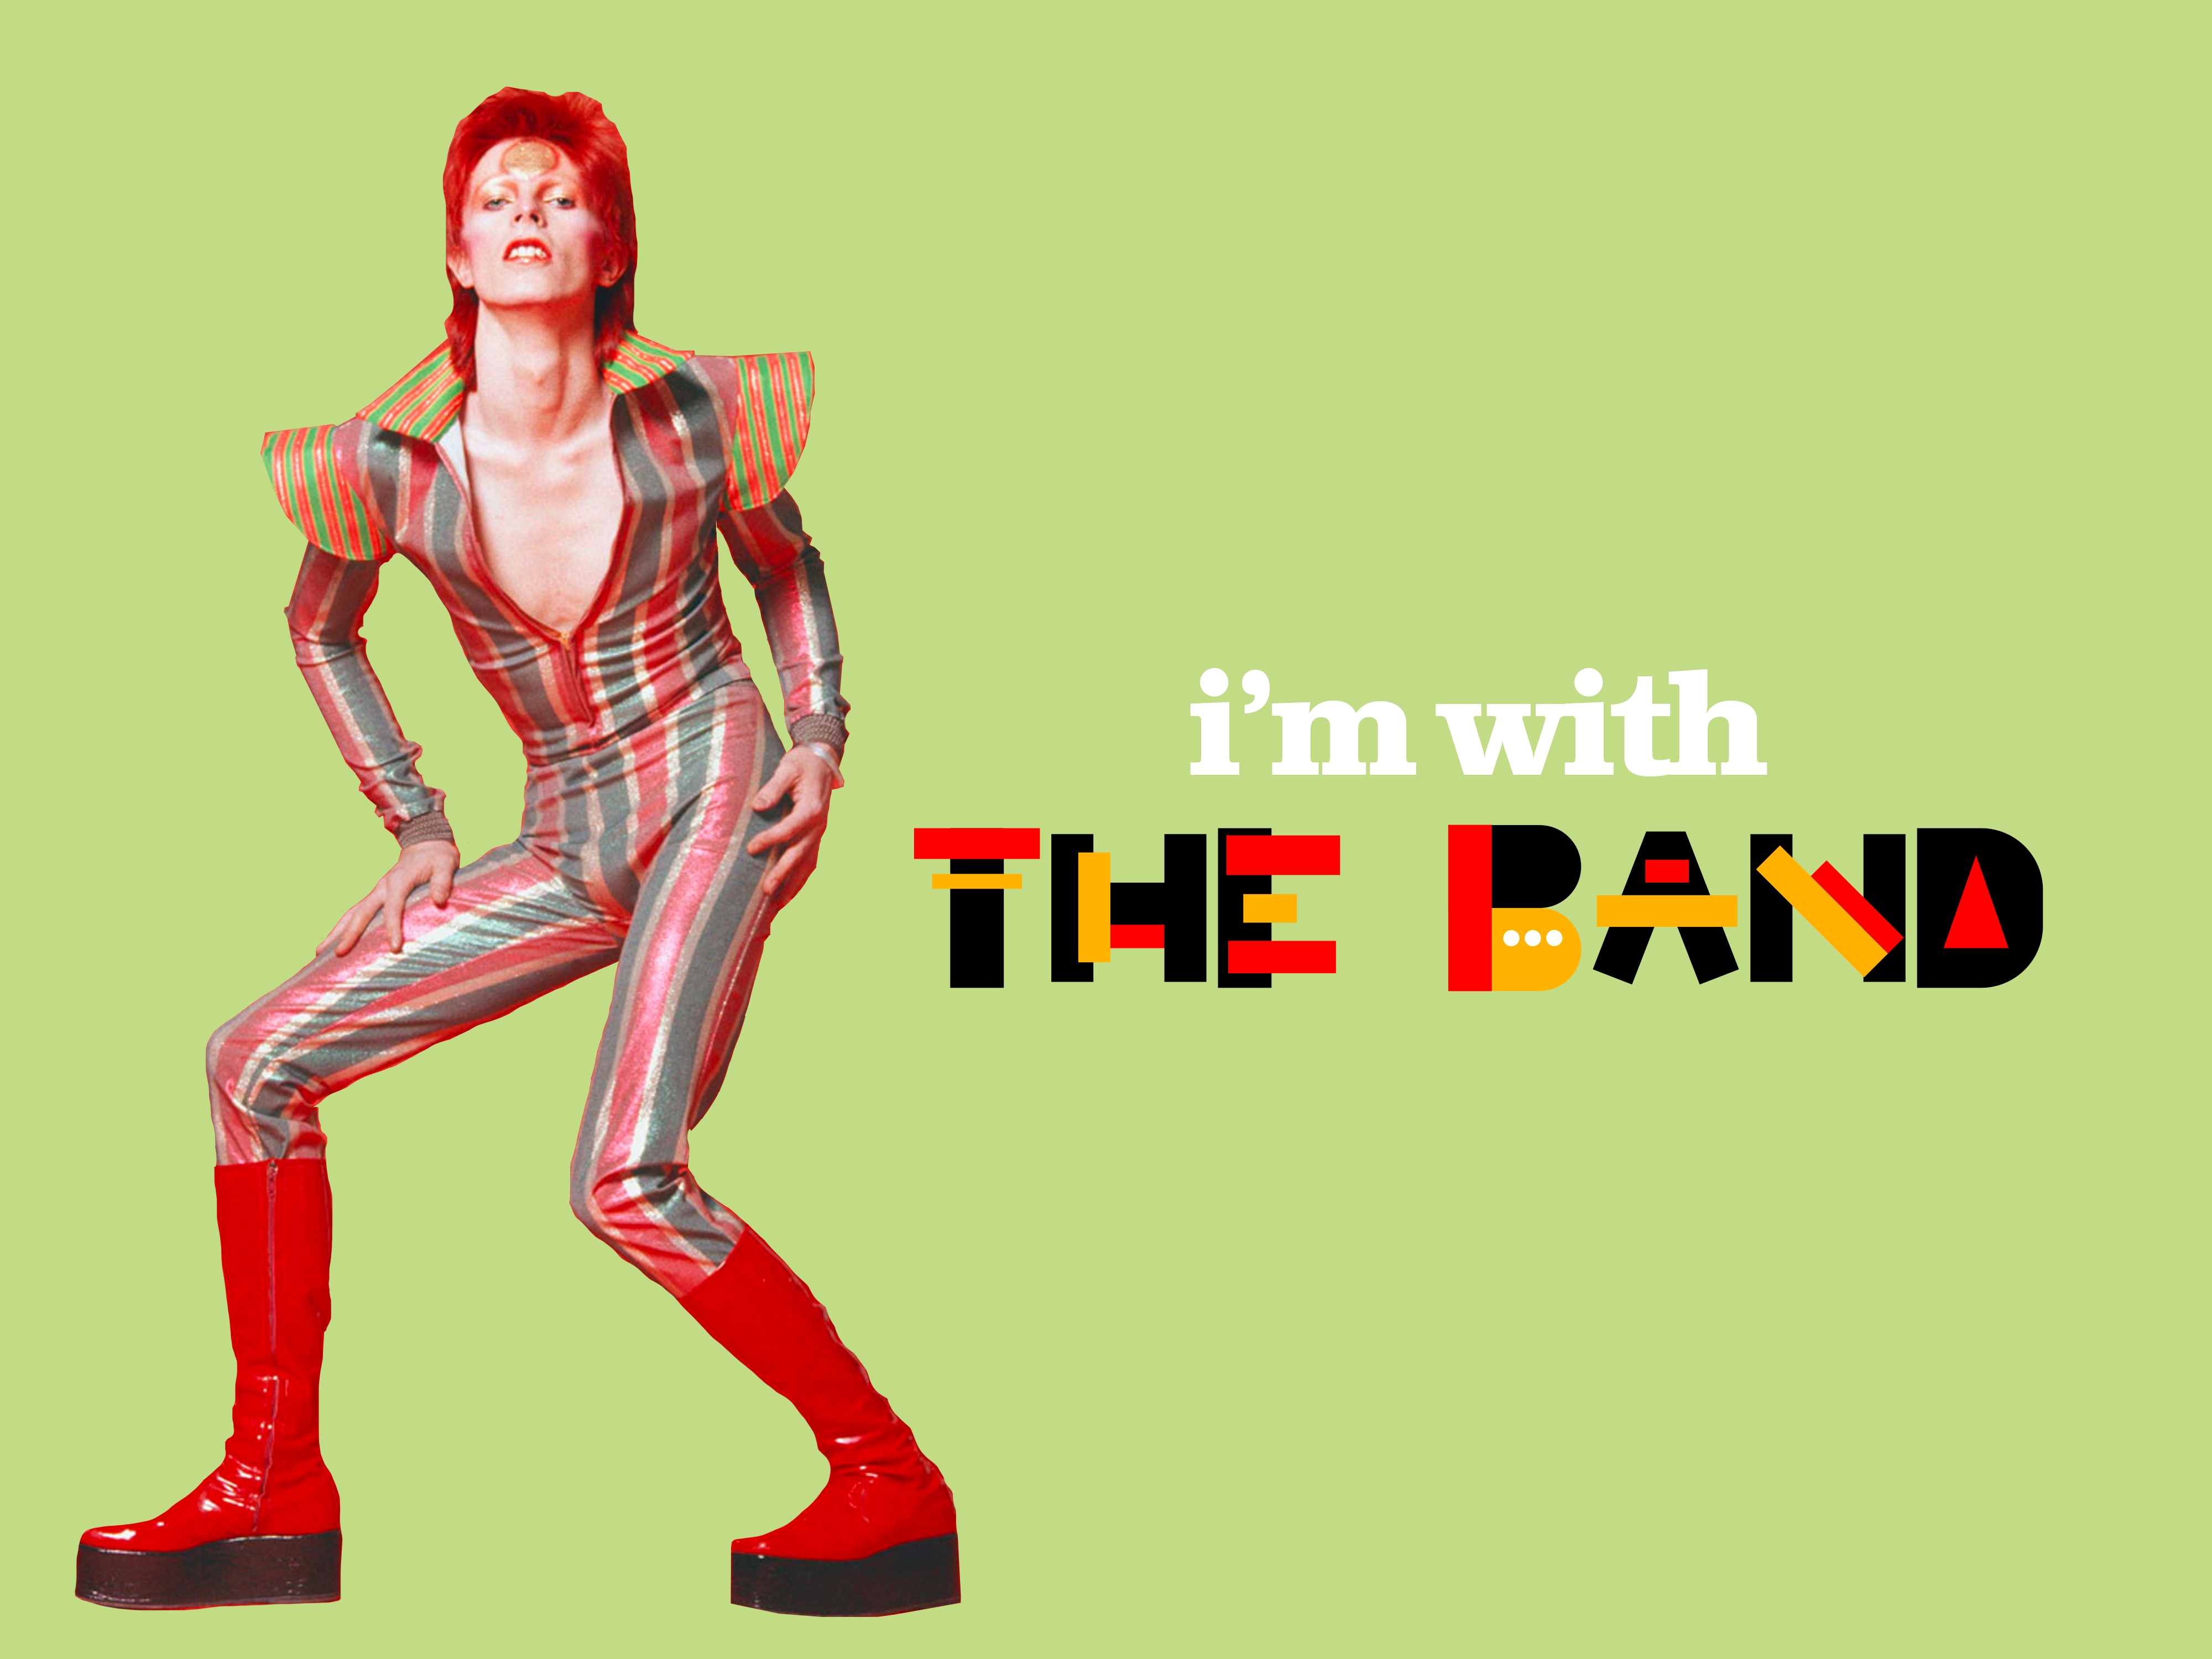 https://stanforddaily.com/wp-content/uploads/2022/05/band-bowie.png